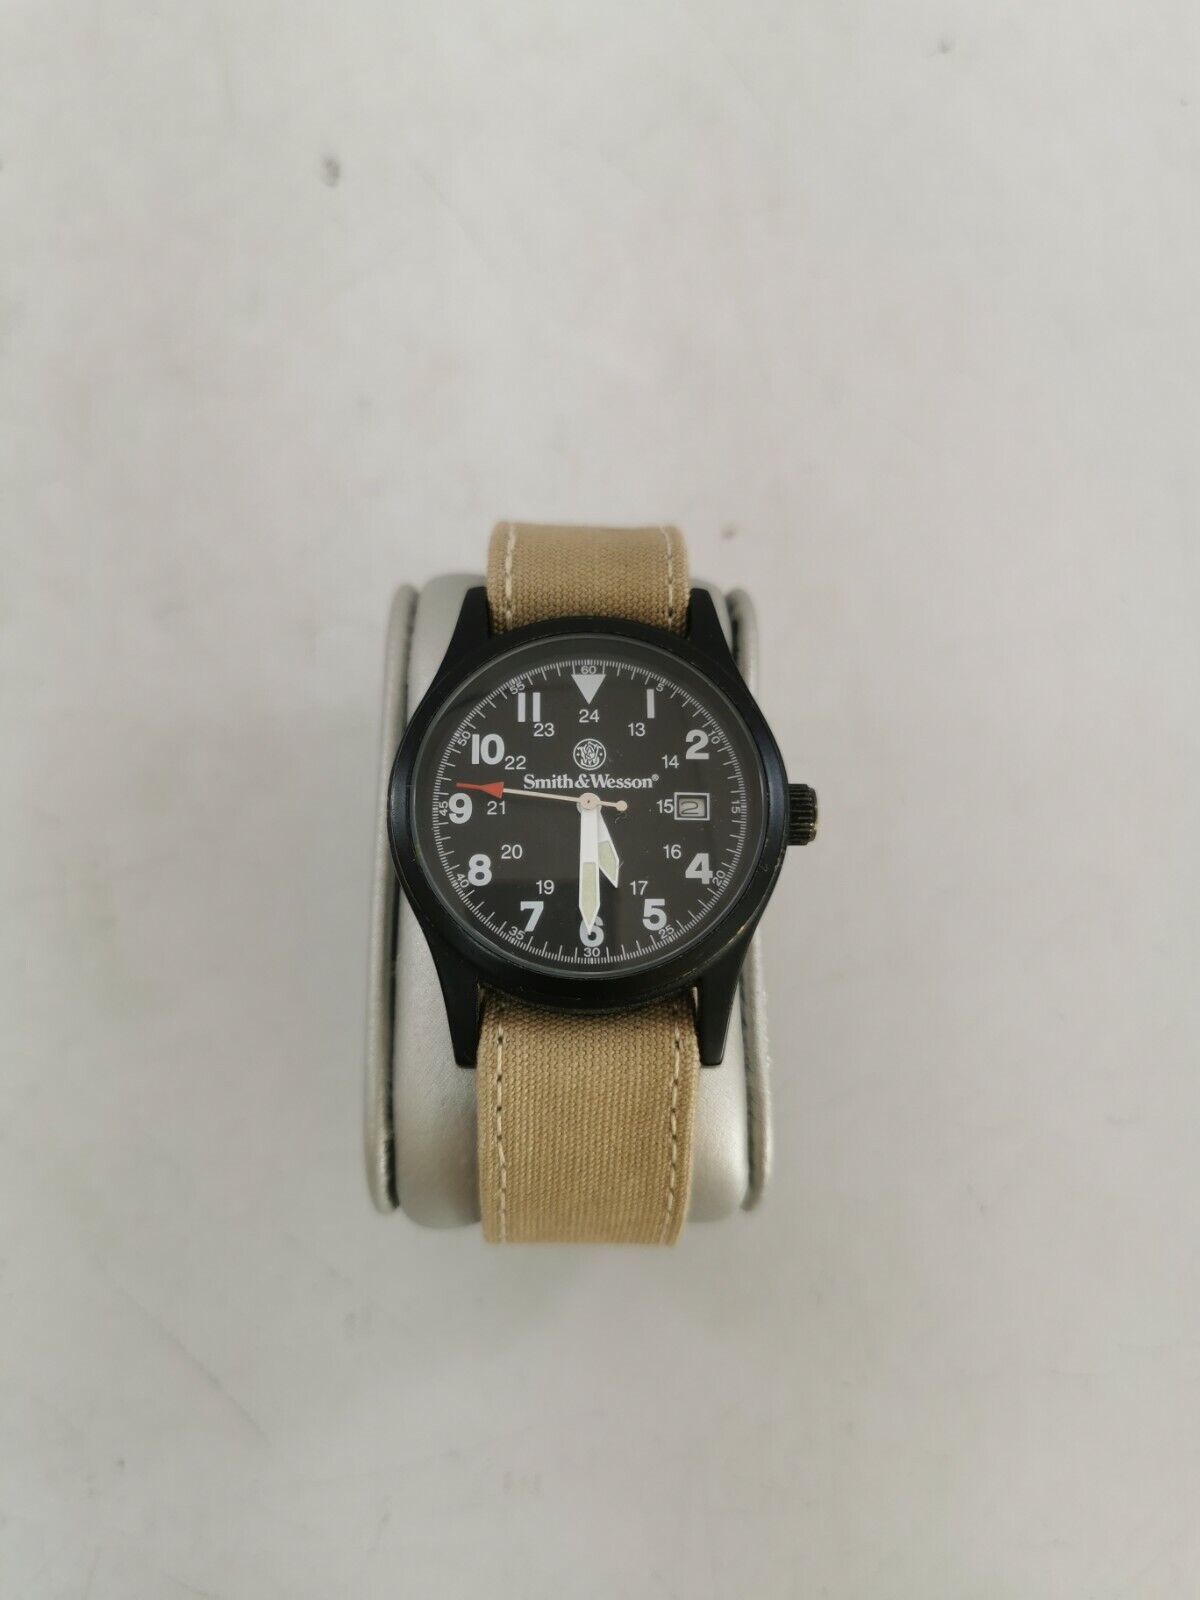 Smith & Wesson Mens Watch With Beige/Khaki Strap GC (FN_3480)